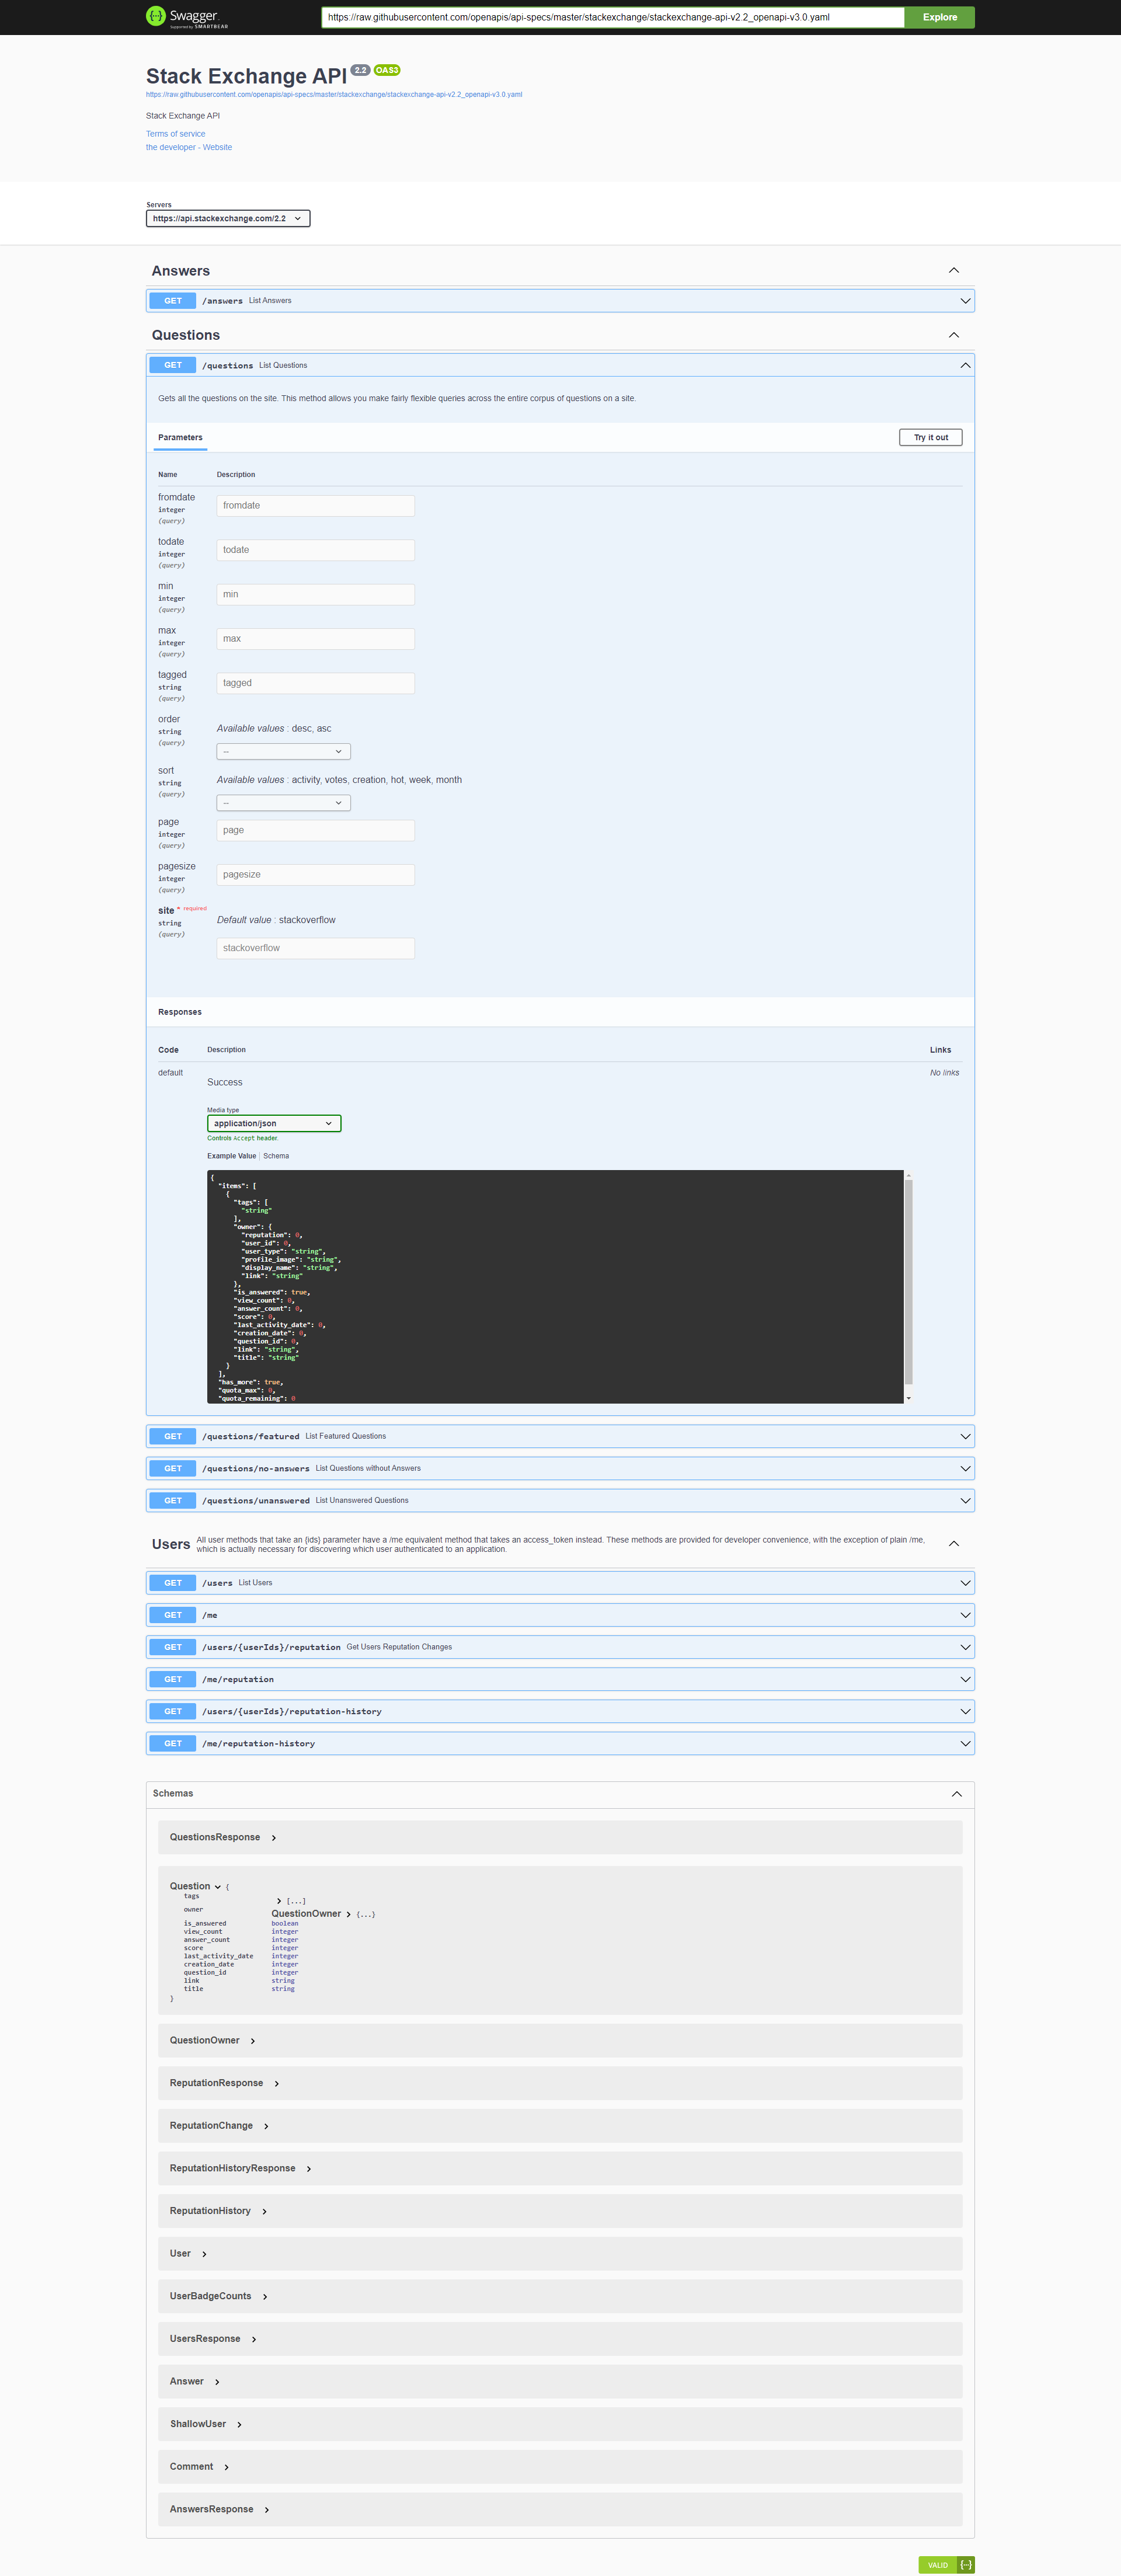 Swagger screenshot showing more usage details and examples from the Questions sections